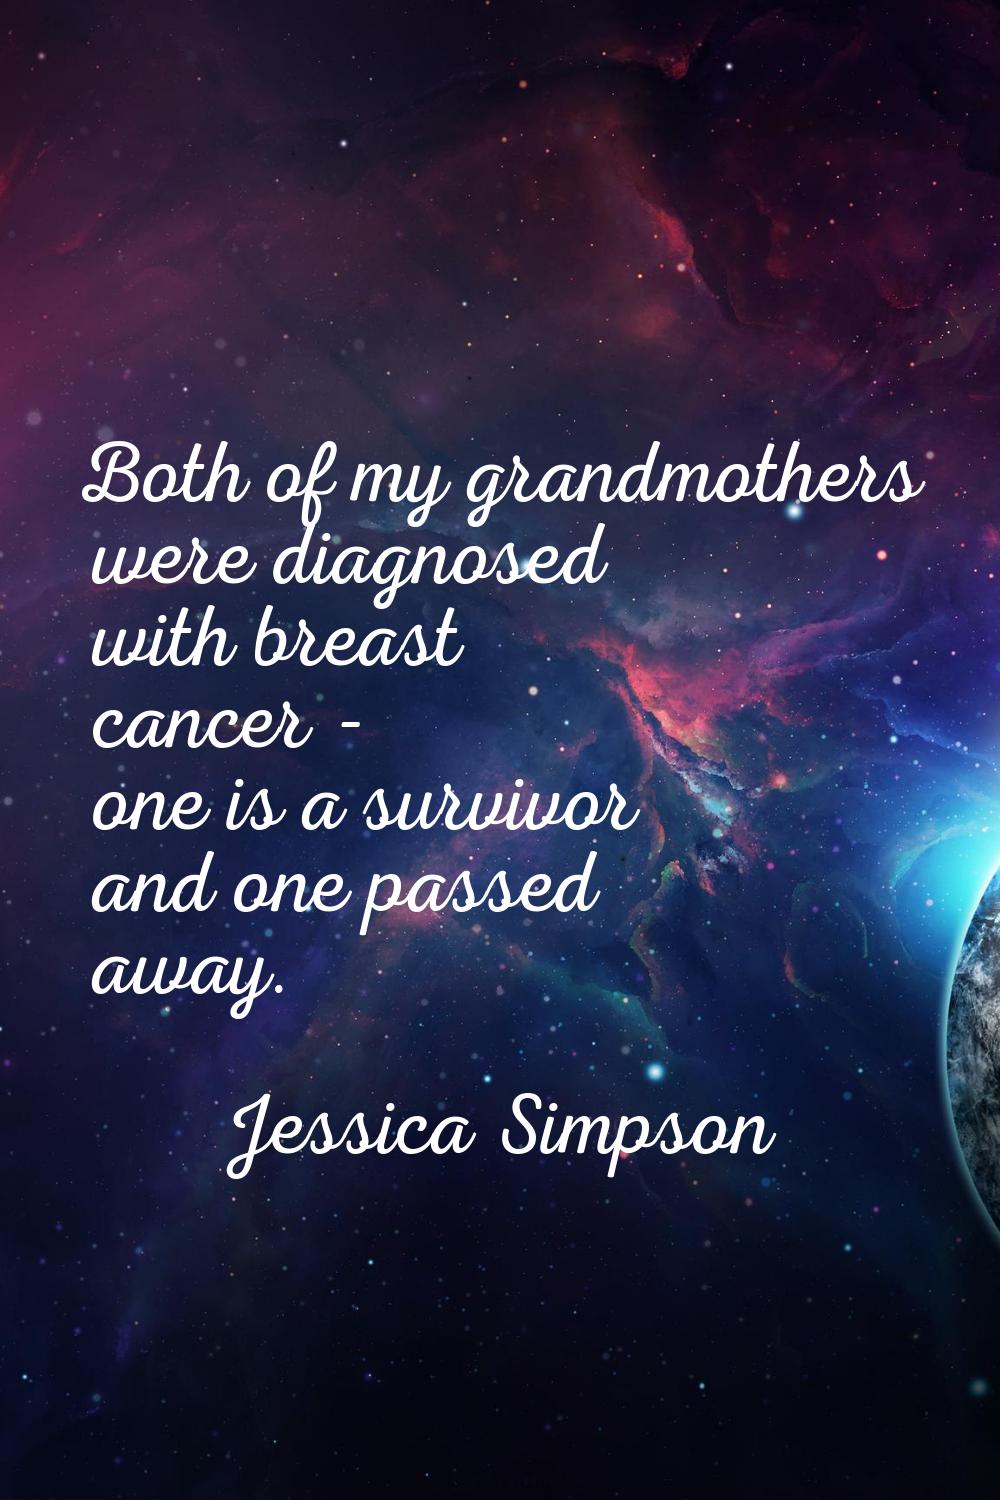 Both of my grandmothers were diagnosed with breast cancer - one is a survivor and one passed away.